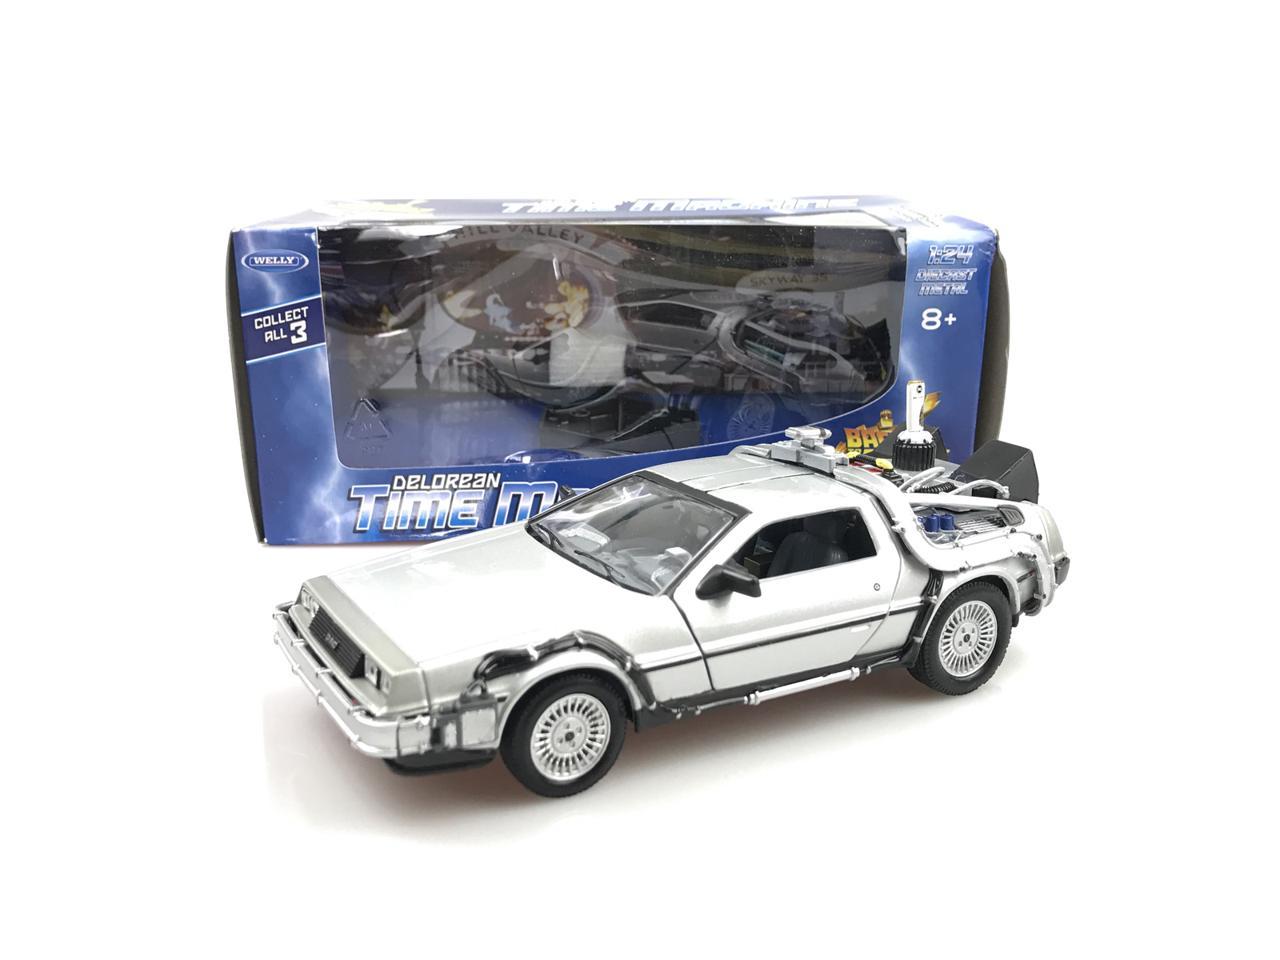 DeLorean Back to the Future 2 "Fly Mode" 1:24 Diecast Model Car 22441FV new 